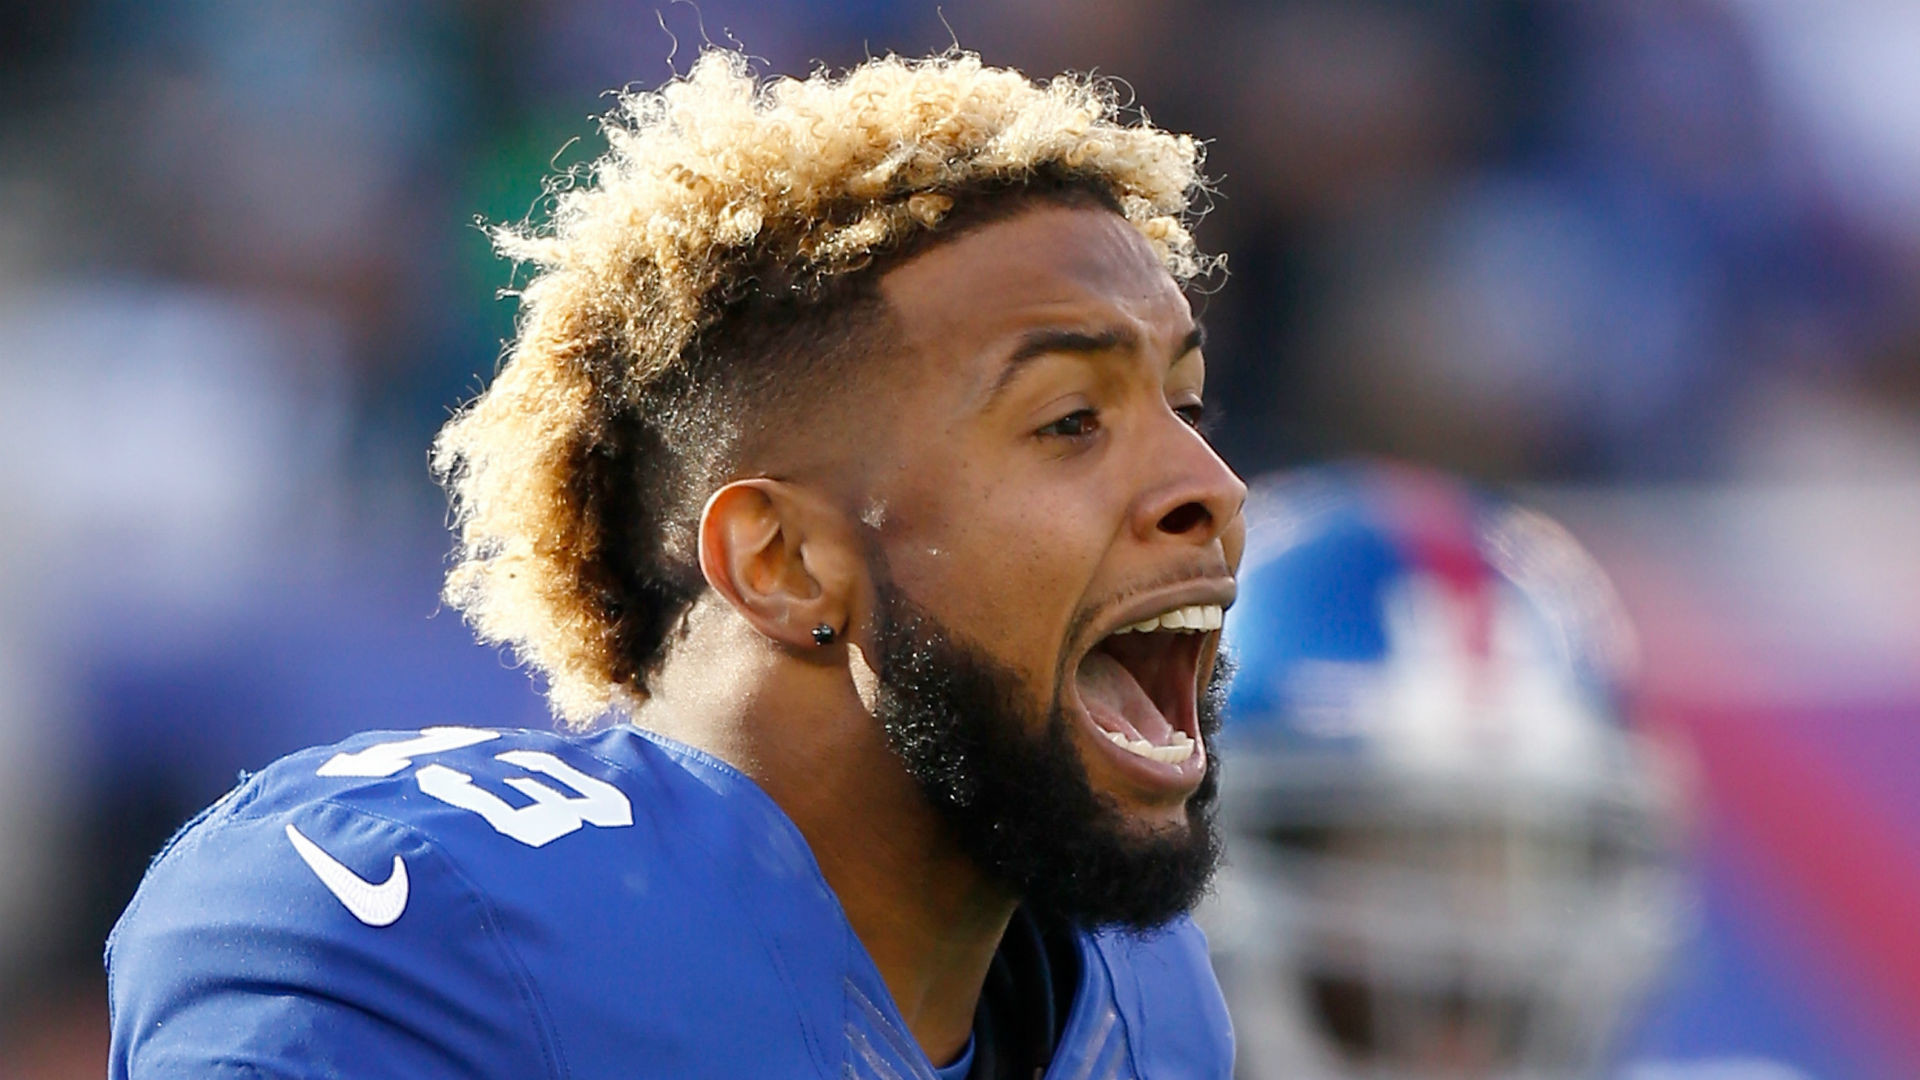 1920x1080 Odell Beckham Jr. may be as dirty as he is talented NFL Sporting